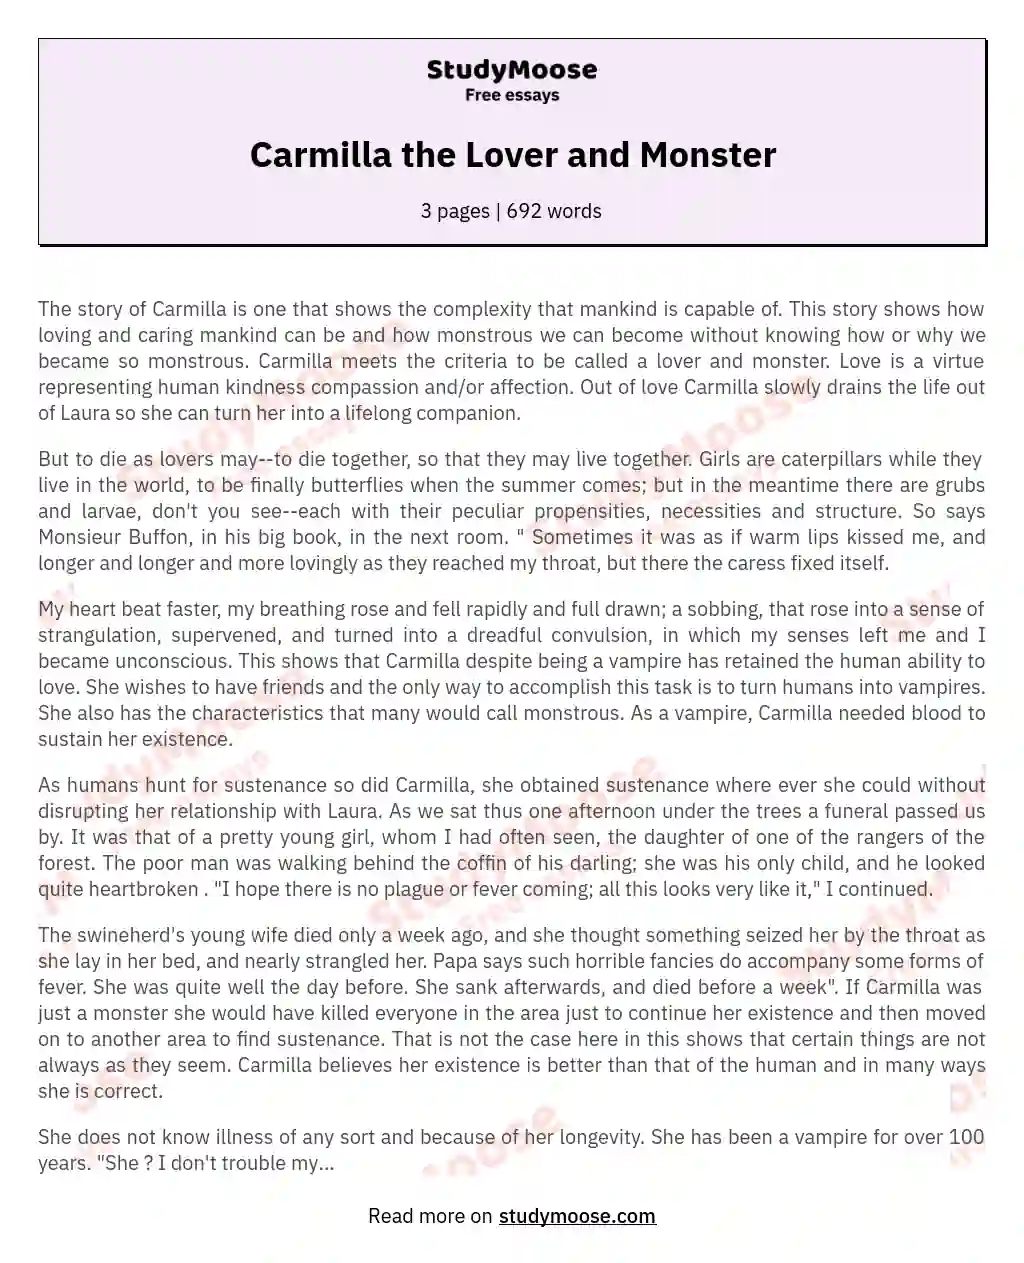 Carmilla the Lover and Monster